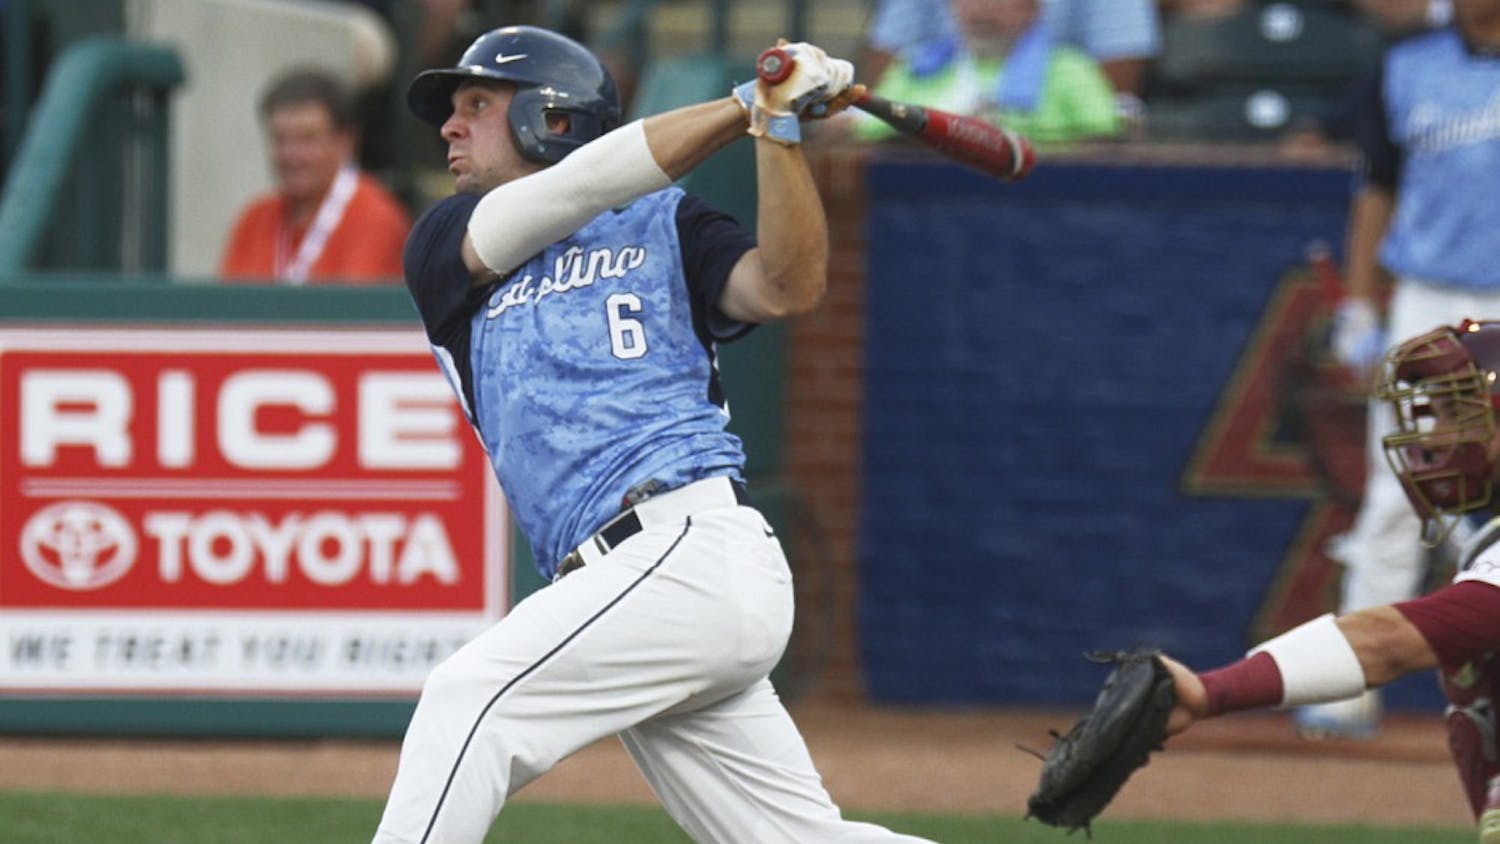 UNC lost to Florida State 7-1 in the first round of the ACC Baseball Championship at NewBridge Bank Park in Greensboro.